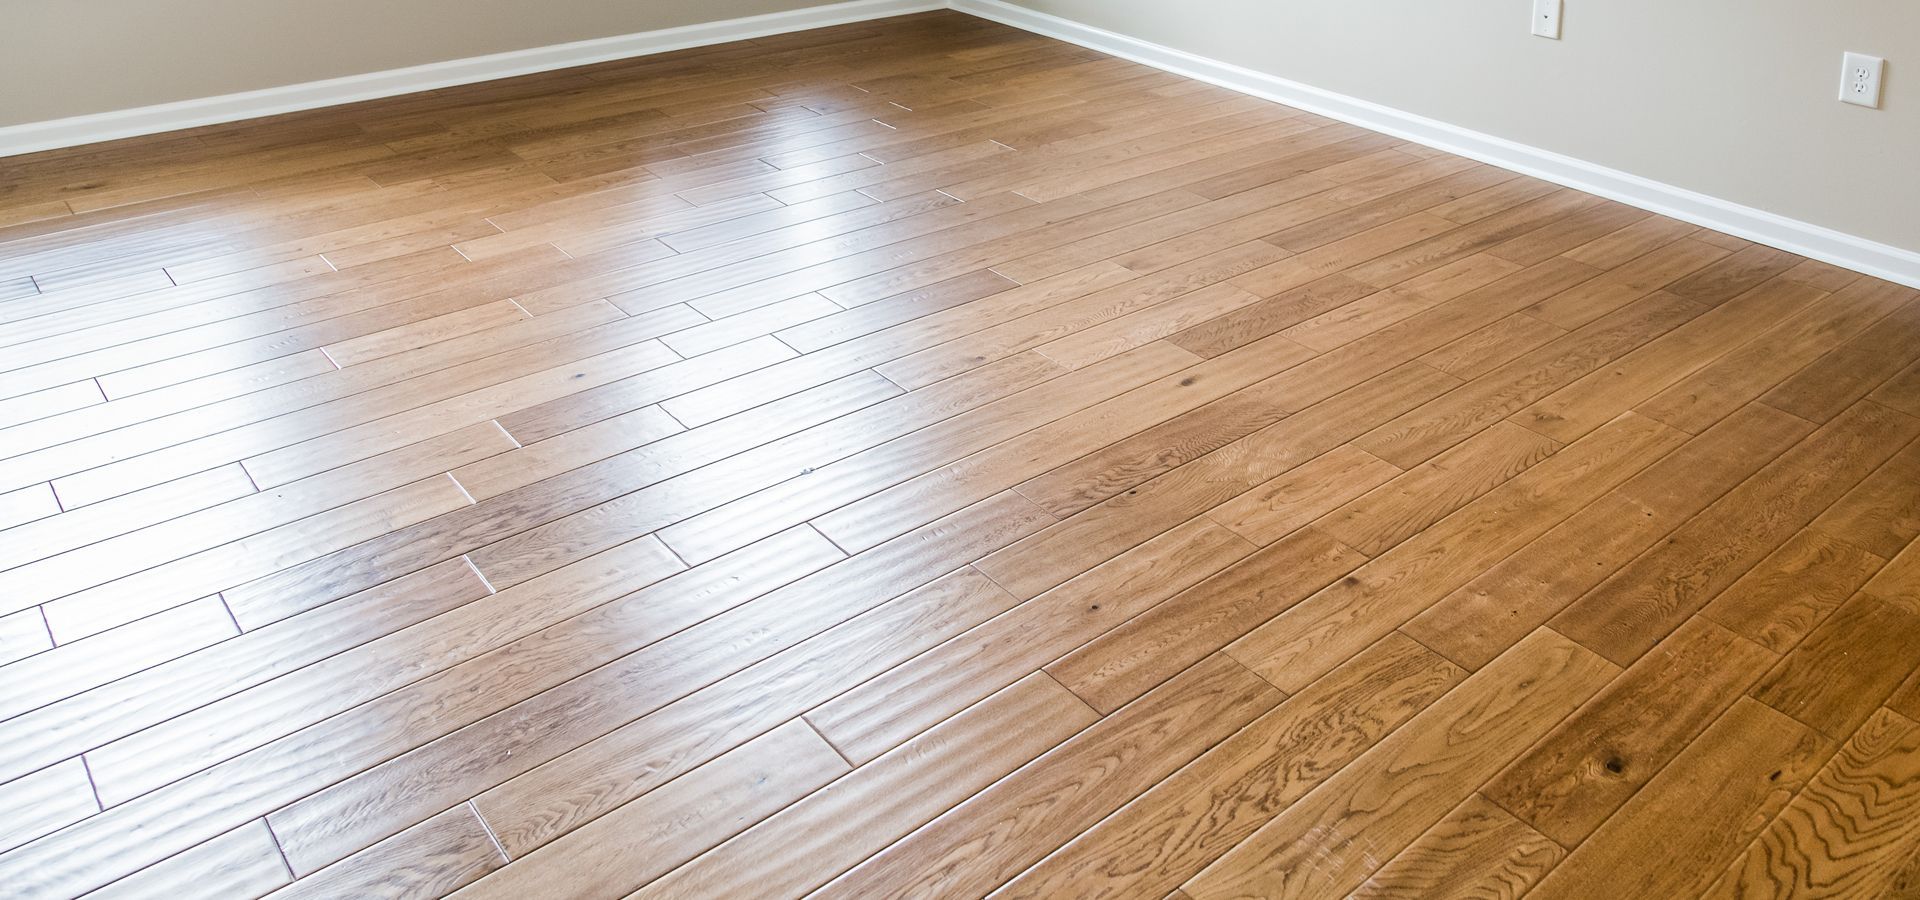 Newly Installed Wooden Flooring